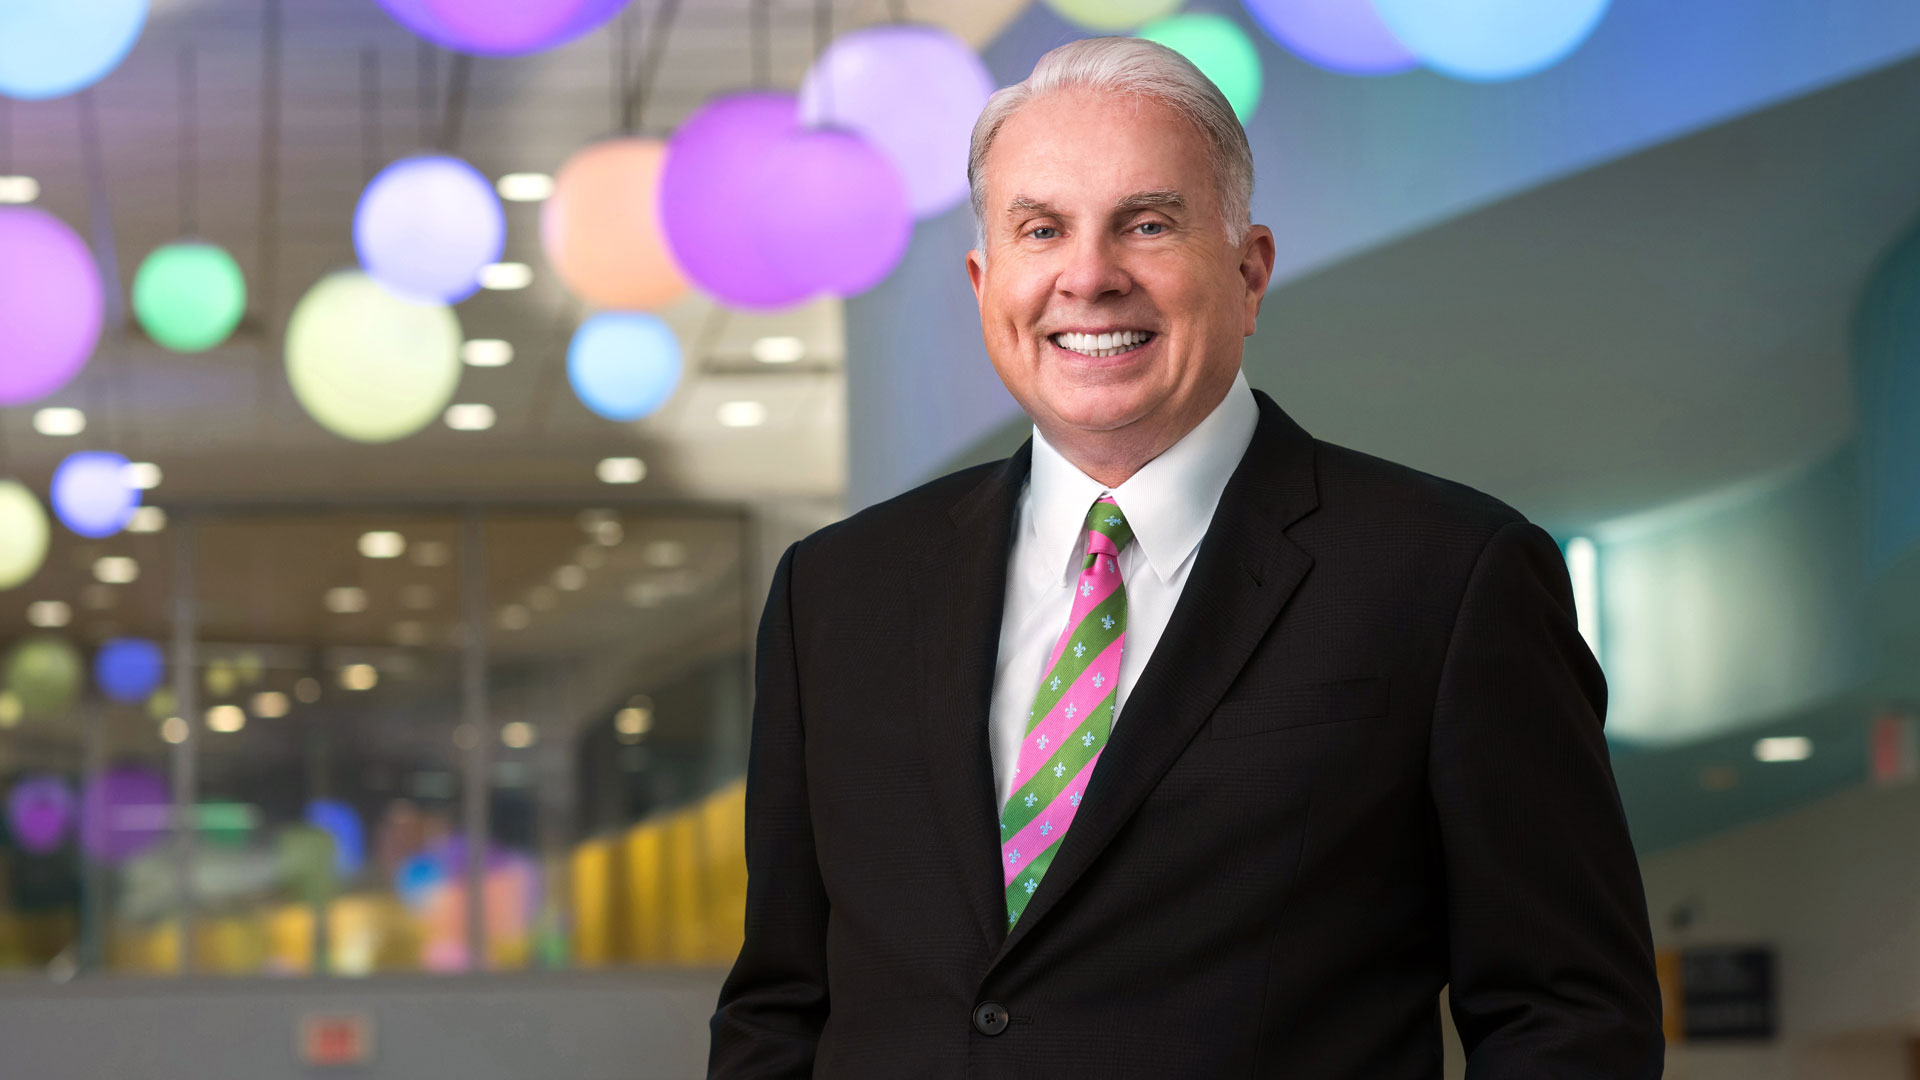 Mark A. Wallace, President and CEO of Texas Children's Hospital